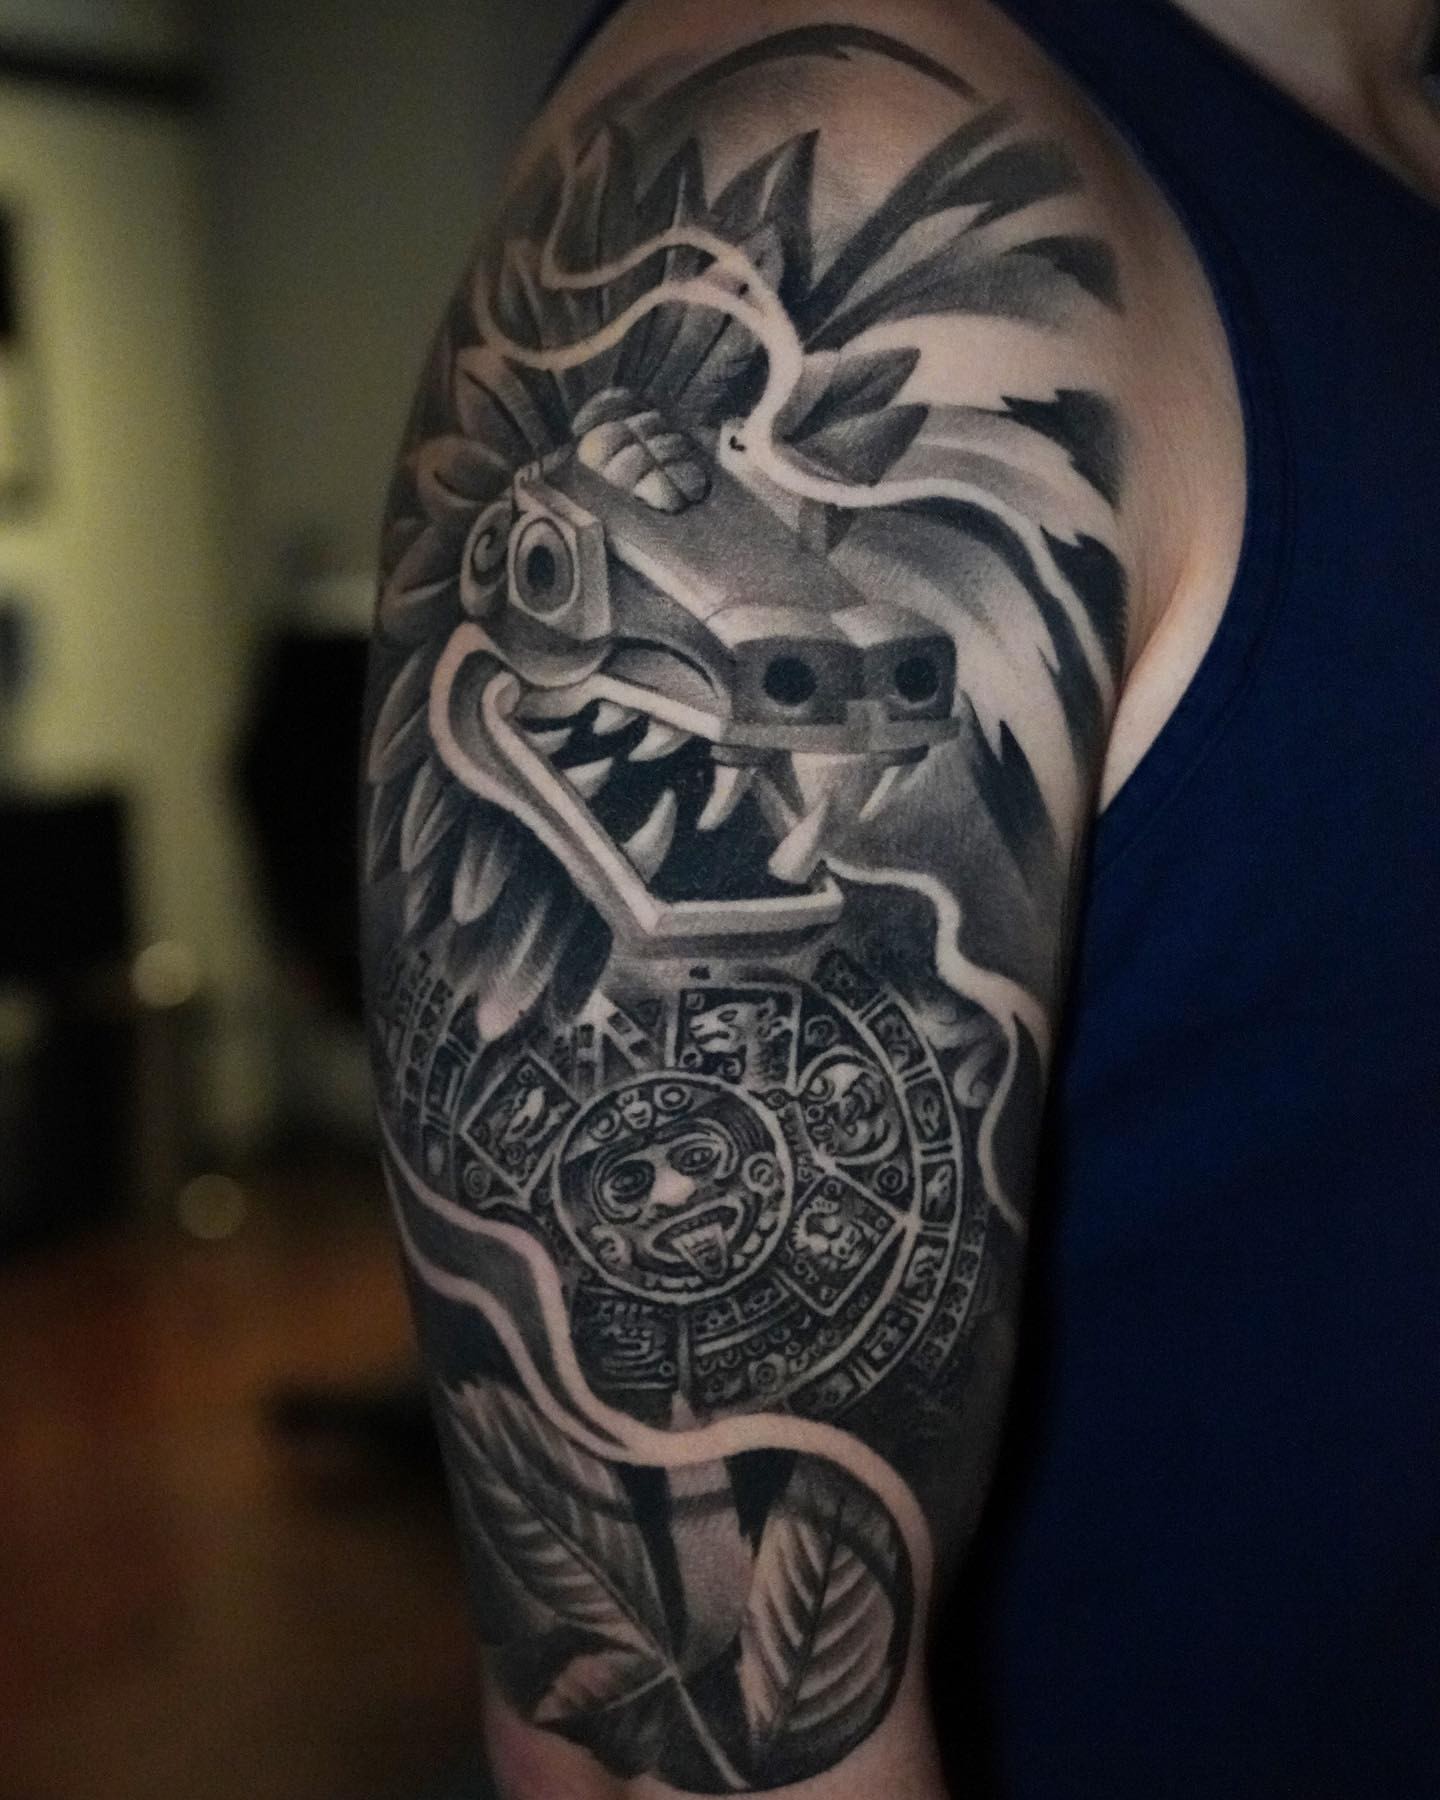 Looking for unique Tattoos? Black and Gray Jaguar Tattoo